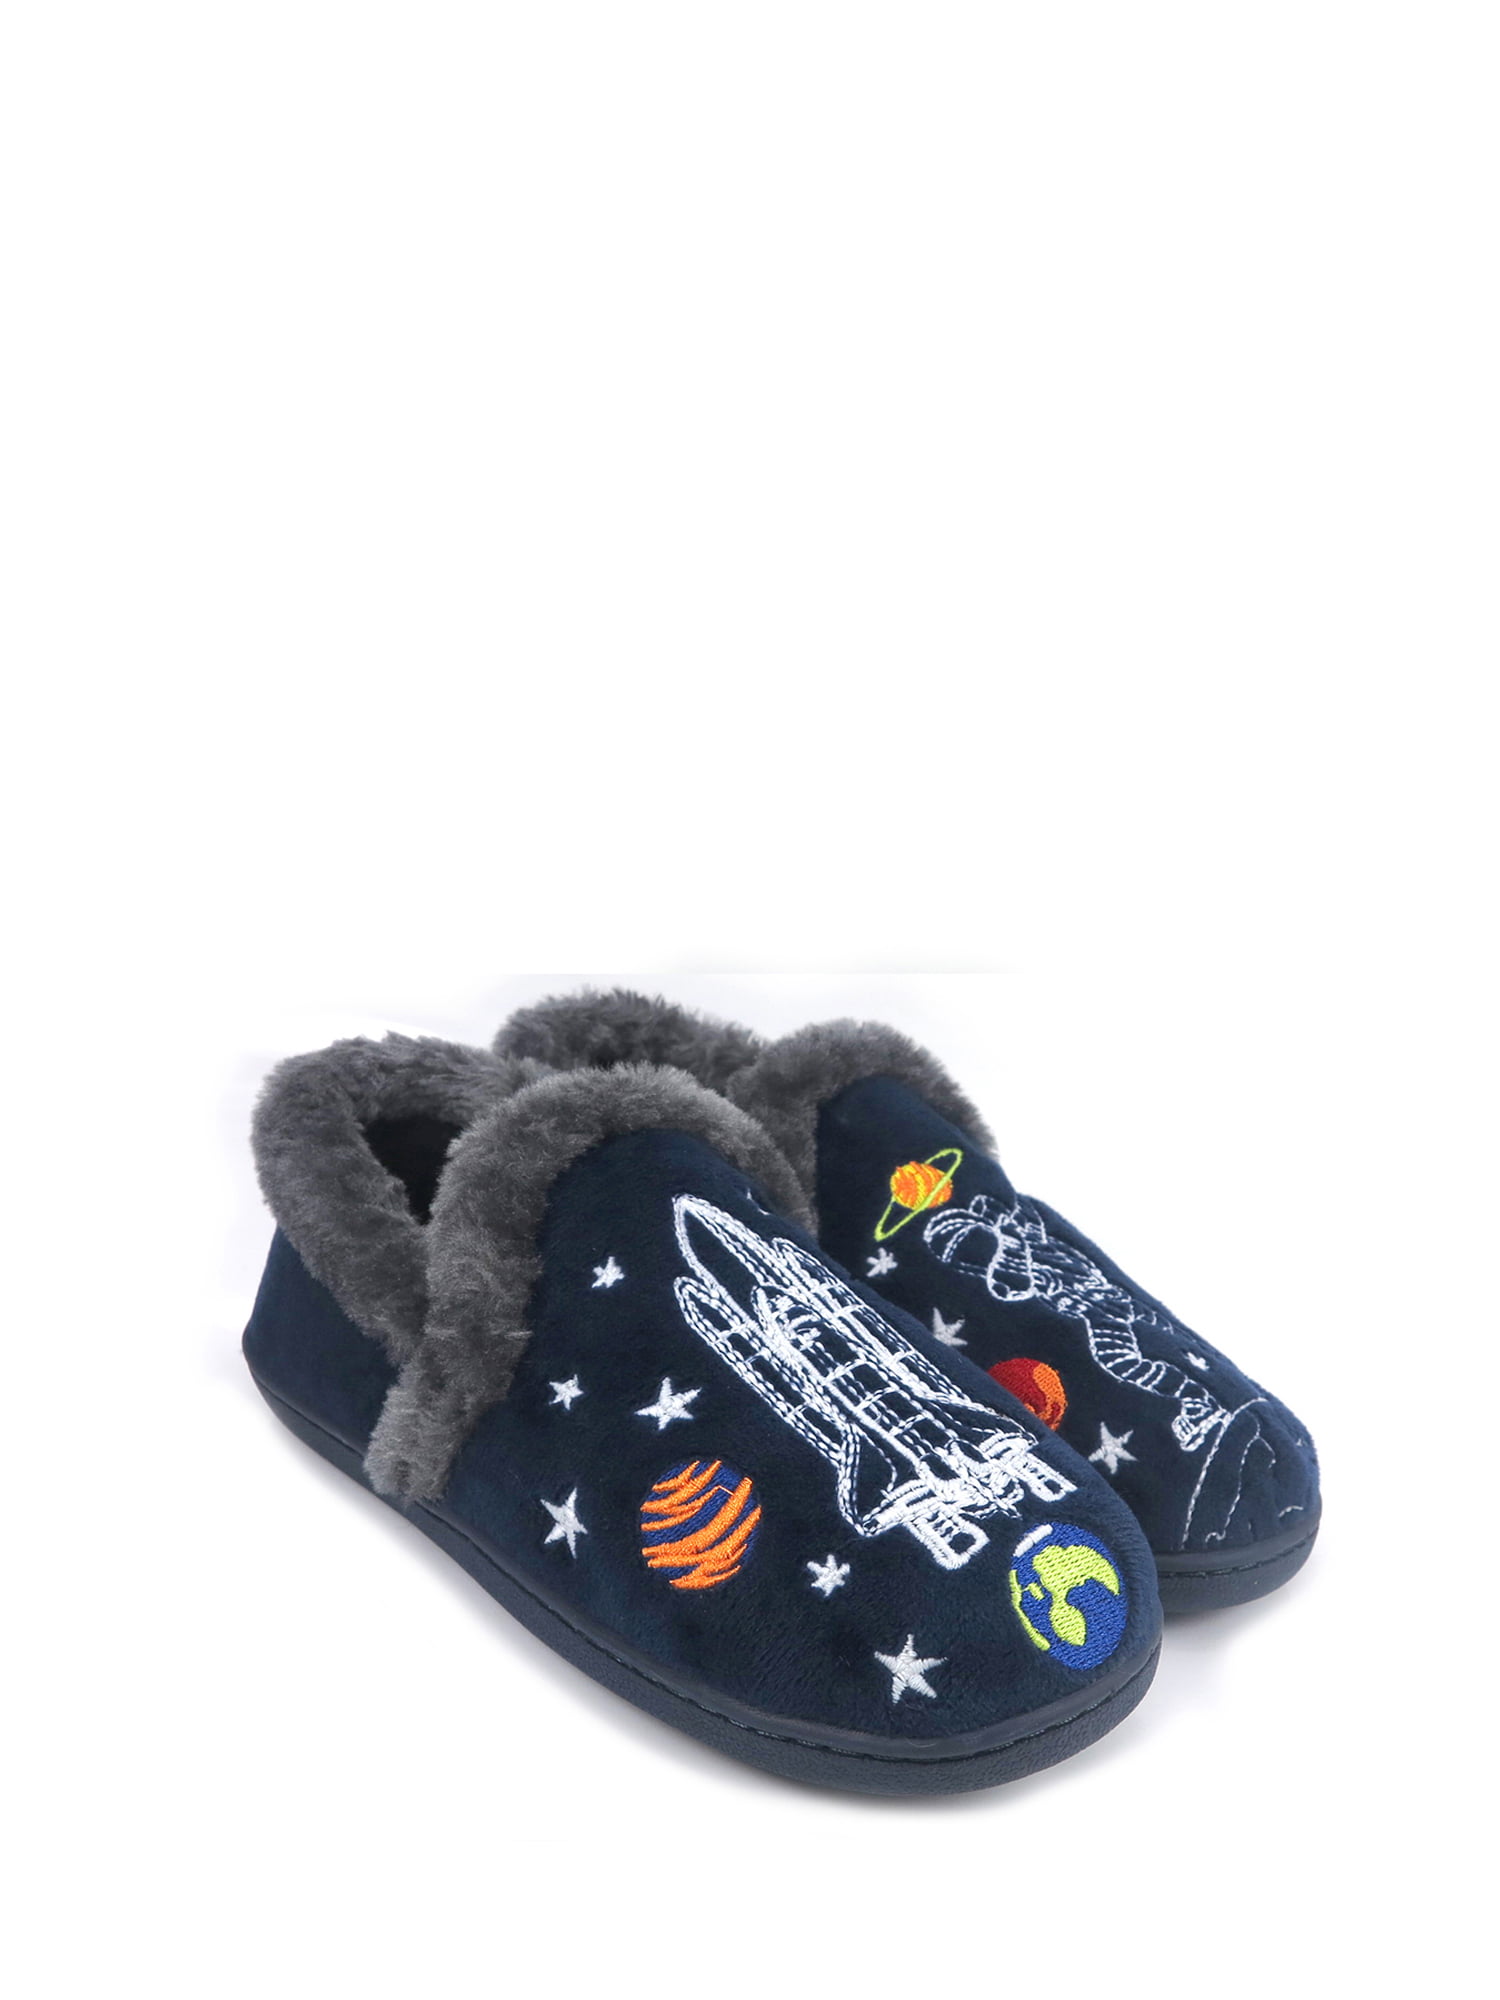 Womens Slide Sandal Flip Flops Shower Slippers Astronaut Cat Like Pizza in Space Beach Shoes Essential